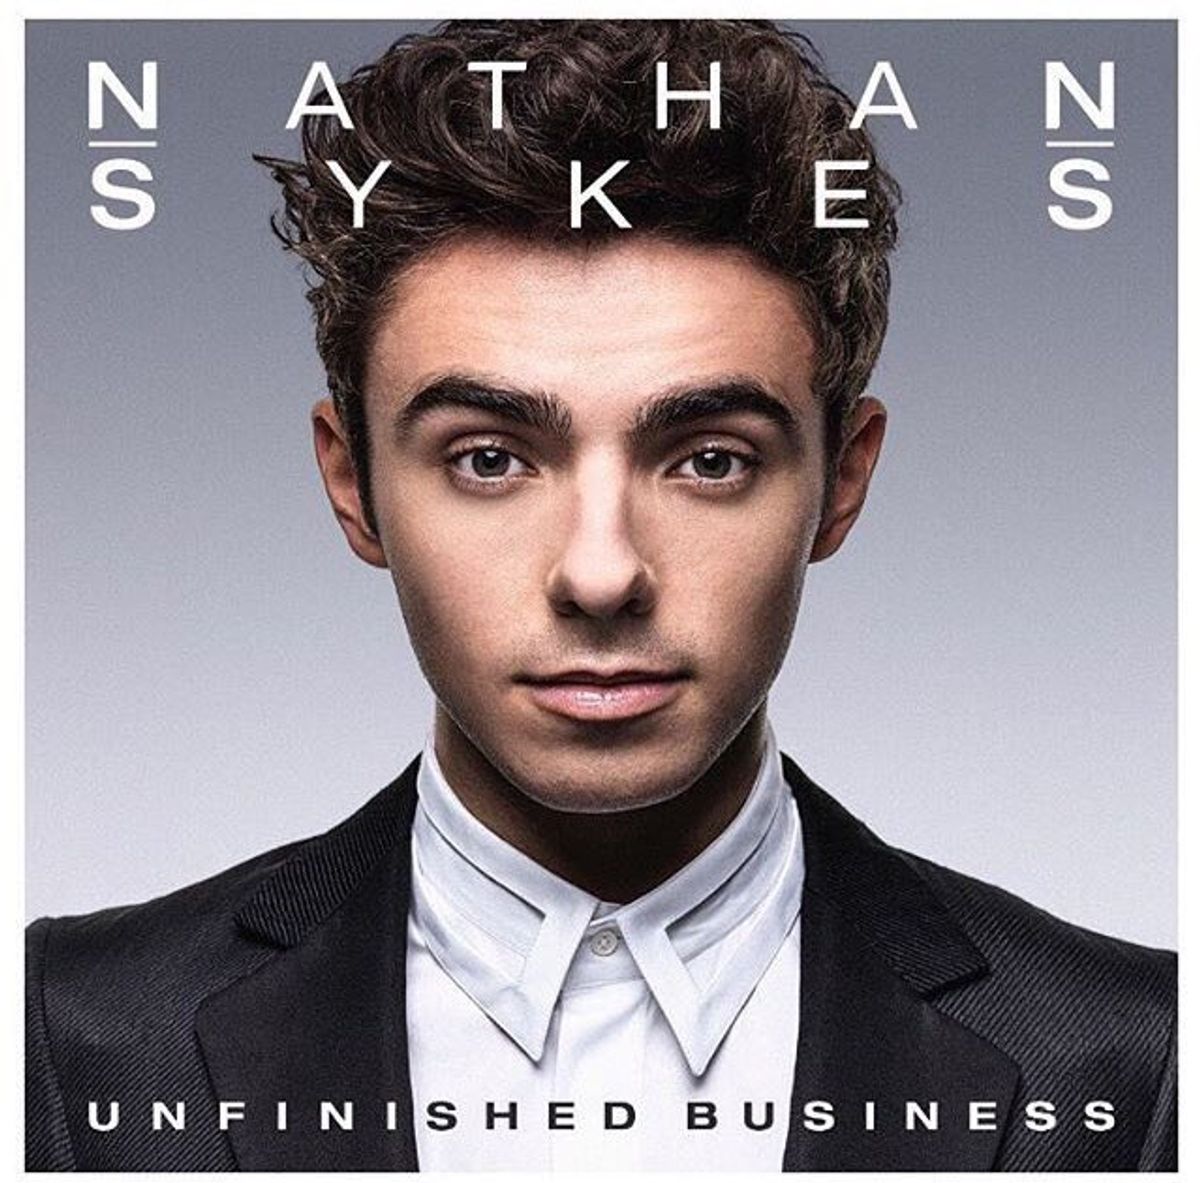 A Review Of Nathan Sykes' "Unfinished Business"